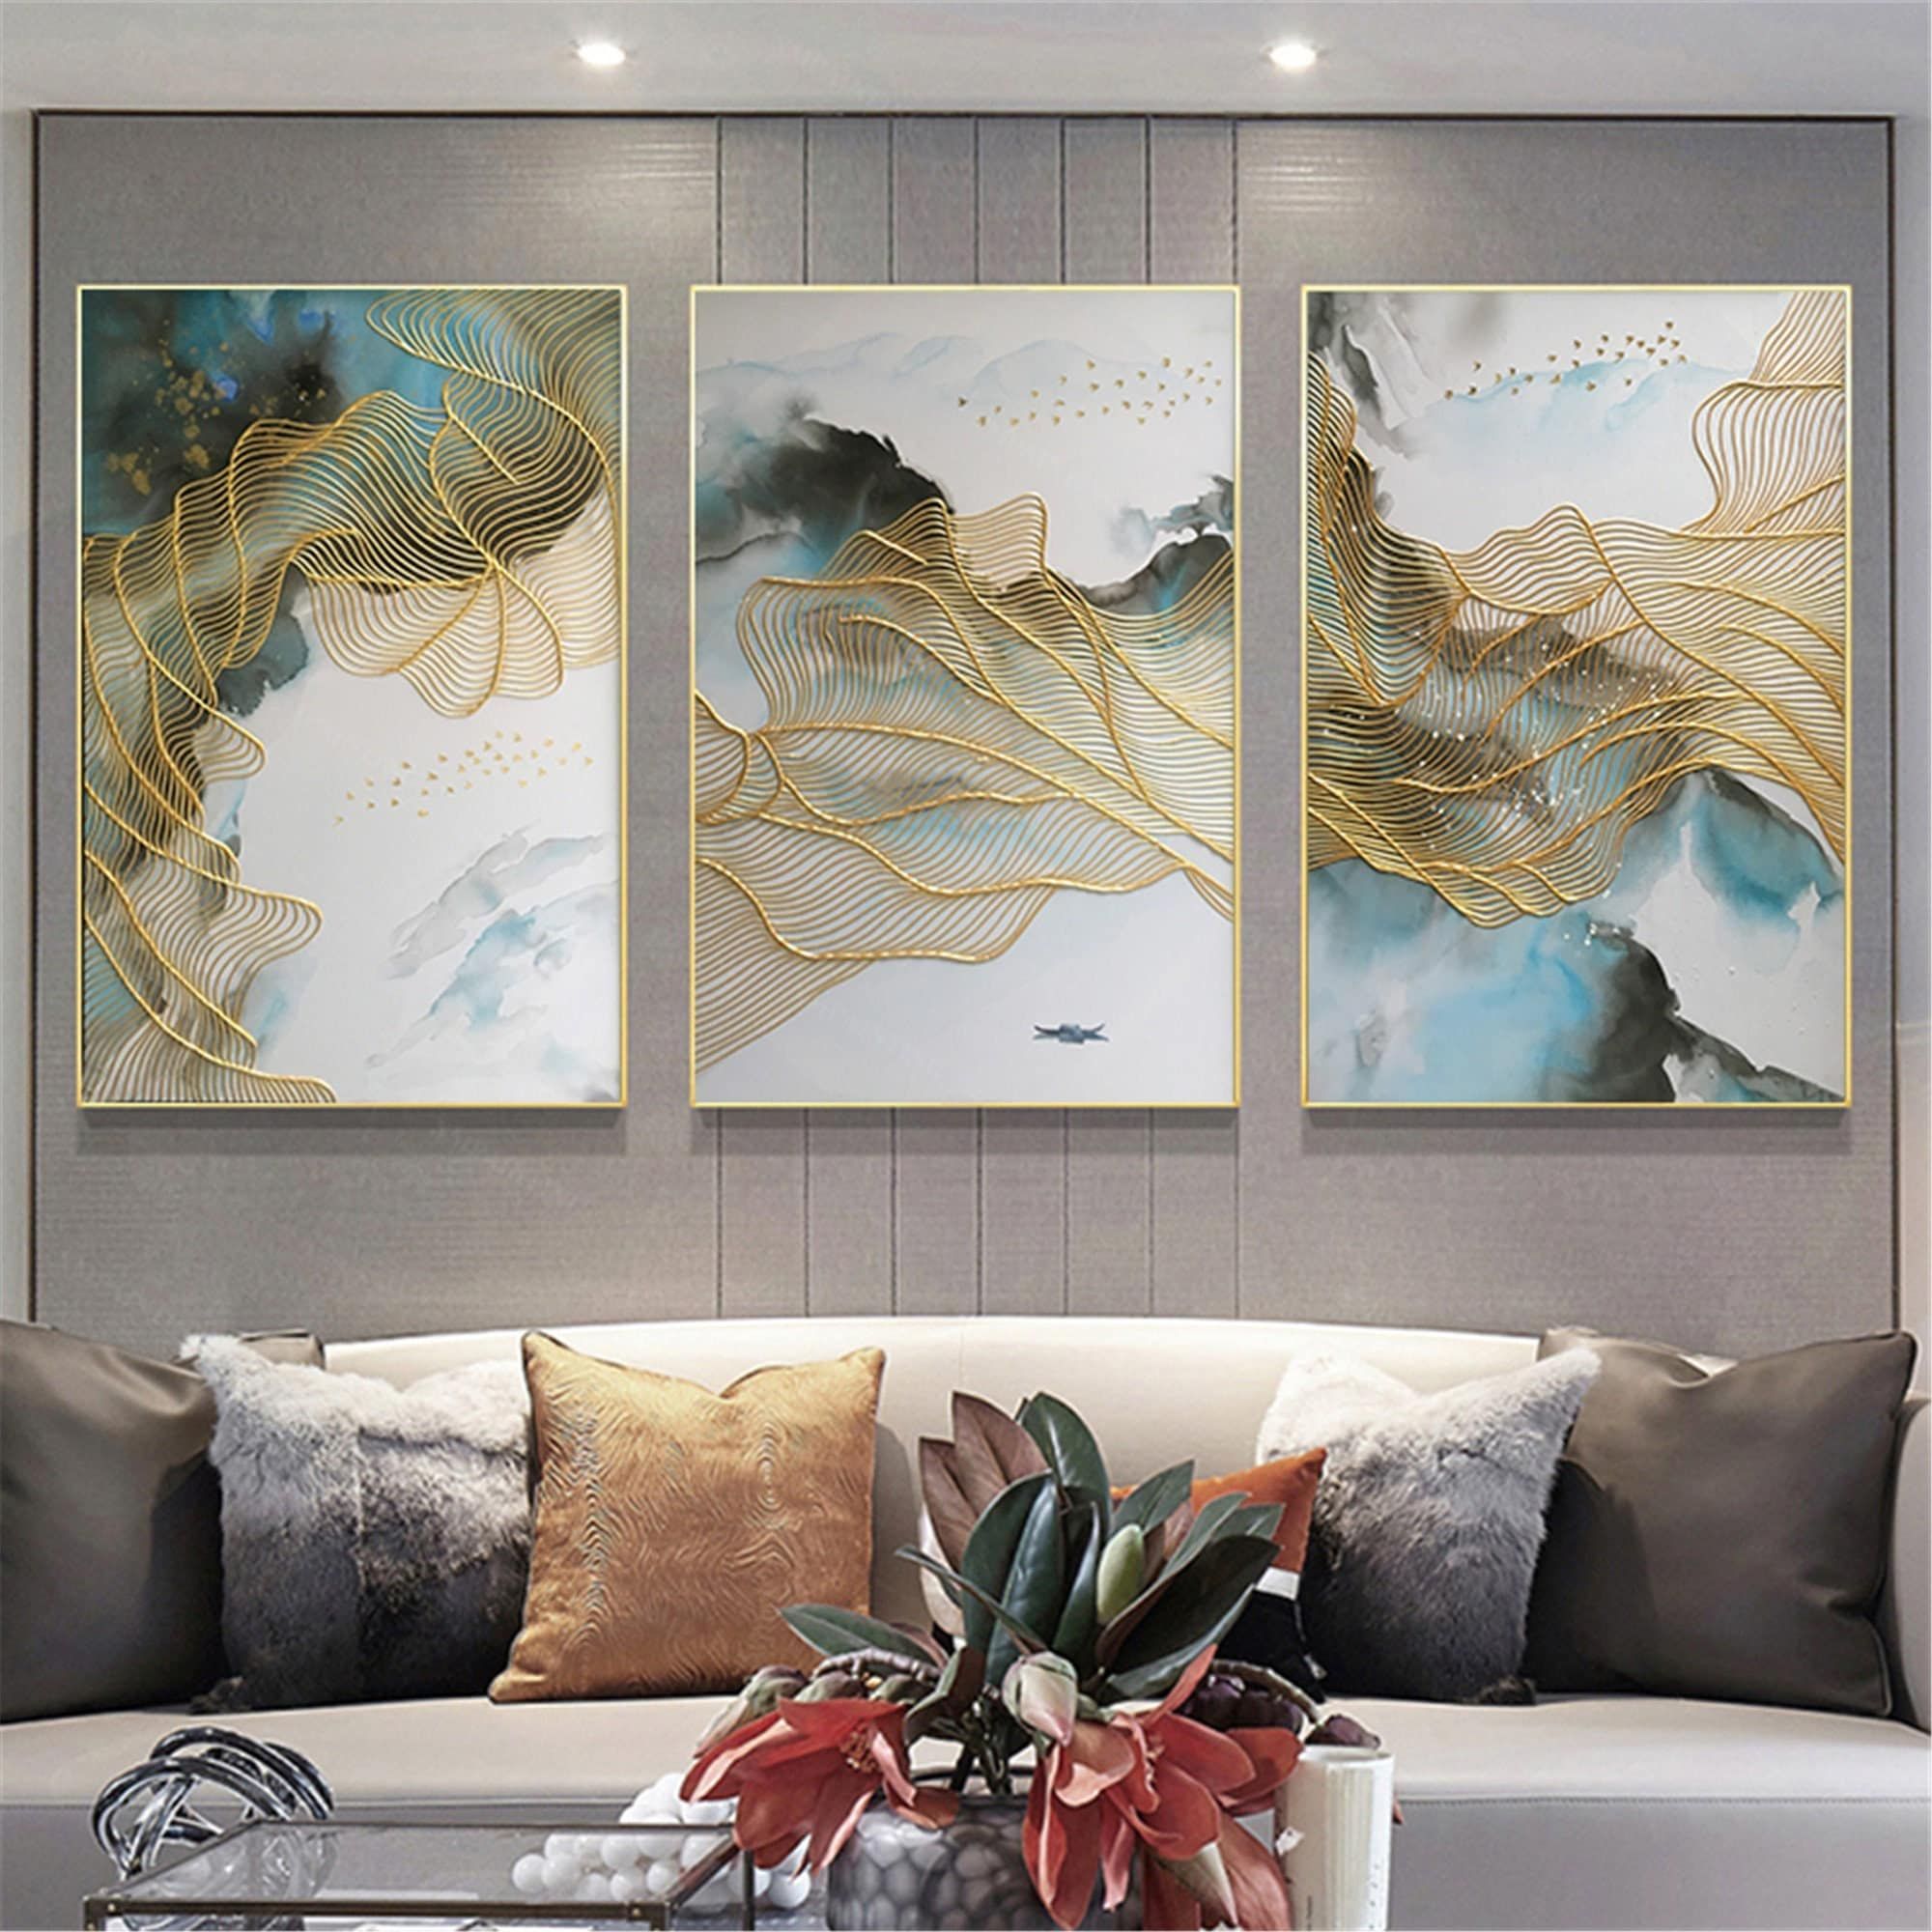 3 Pieces Gold Lines Abstract Painting On Canvas Framed Wall – Etsy With Regard To Line Abstract Wall Art (View 2 of 15)